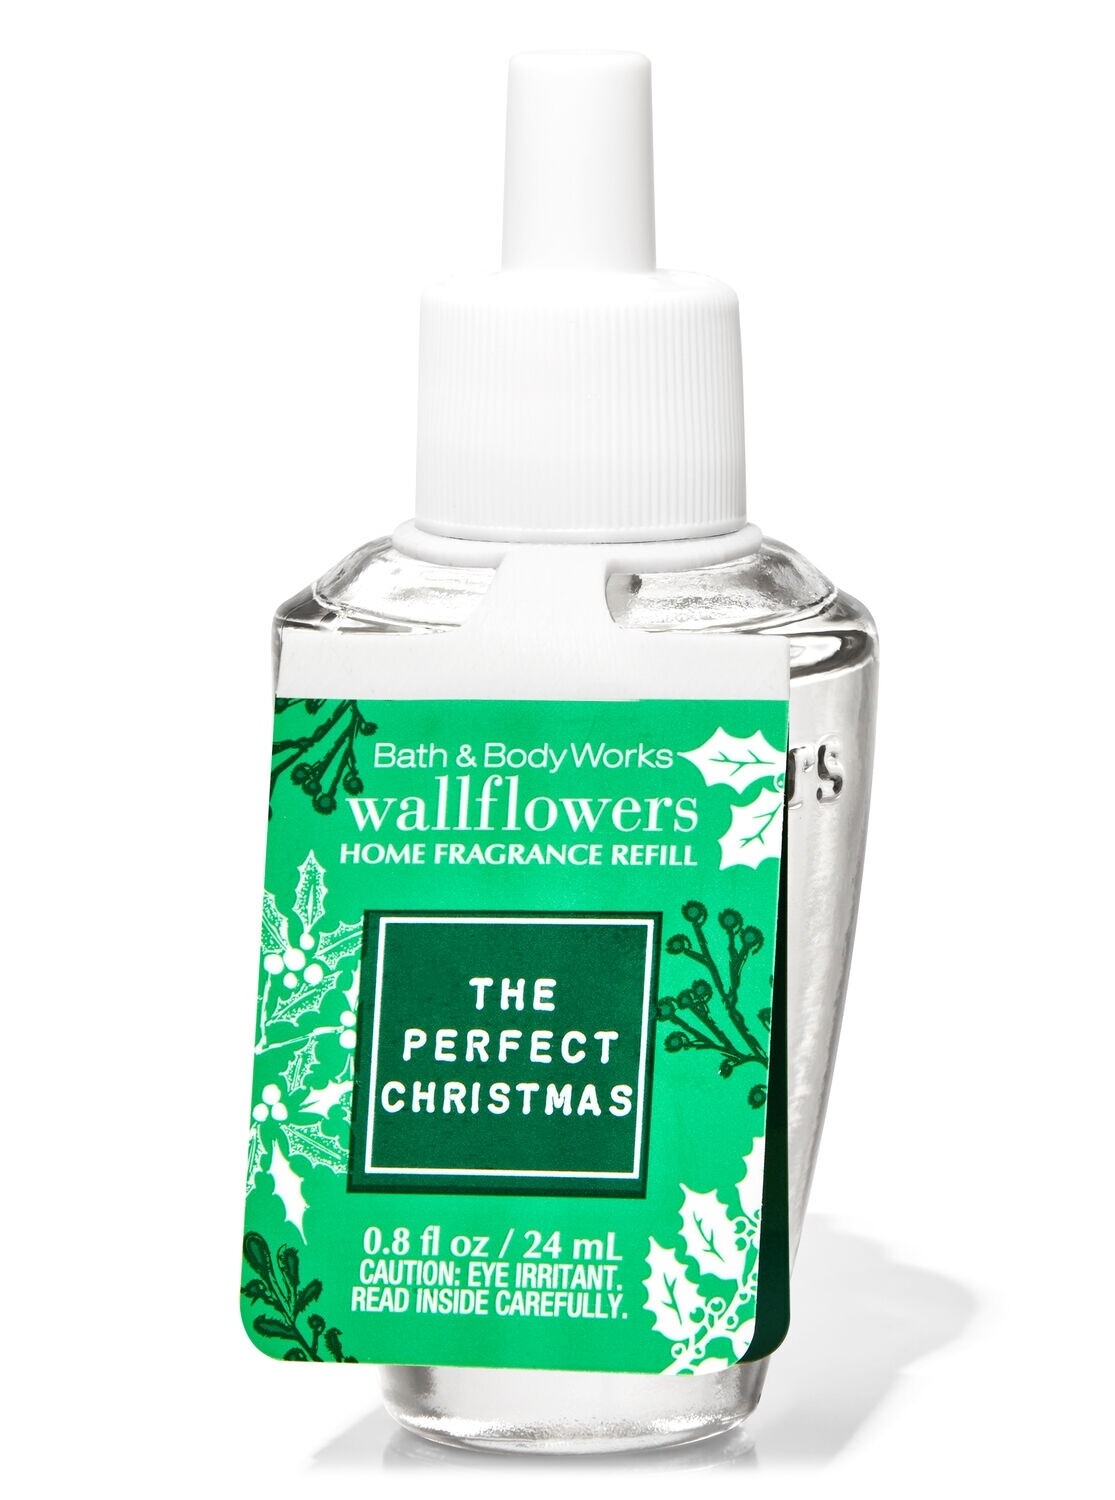 Bath and body works wallflower refill- The Perfect Christmas 